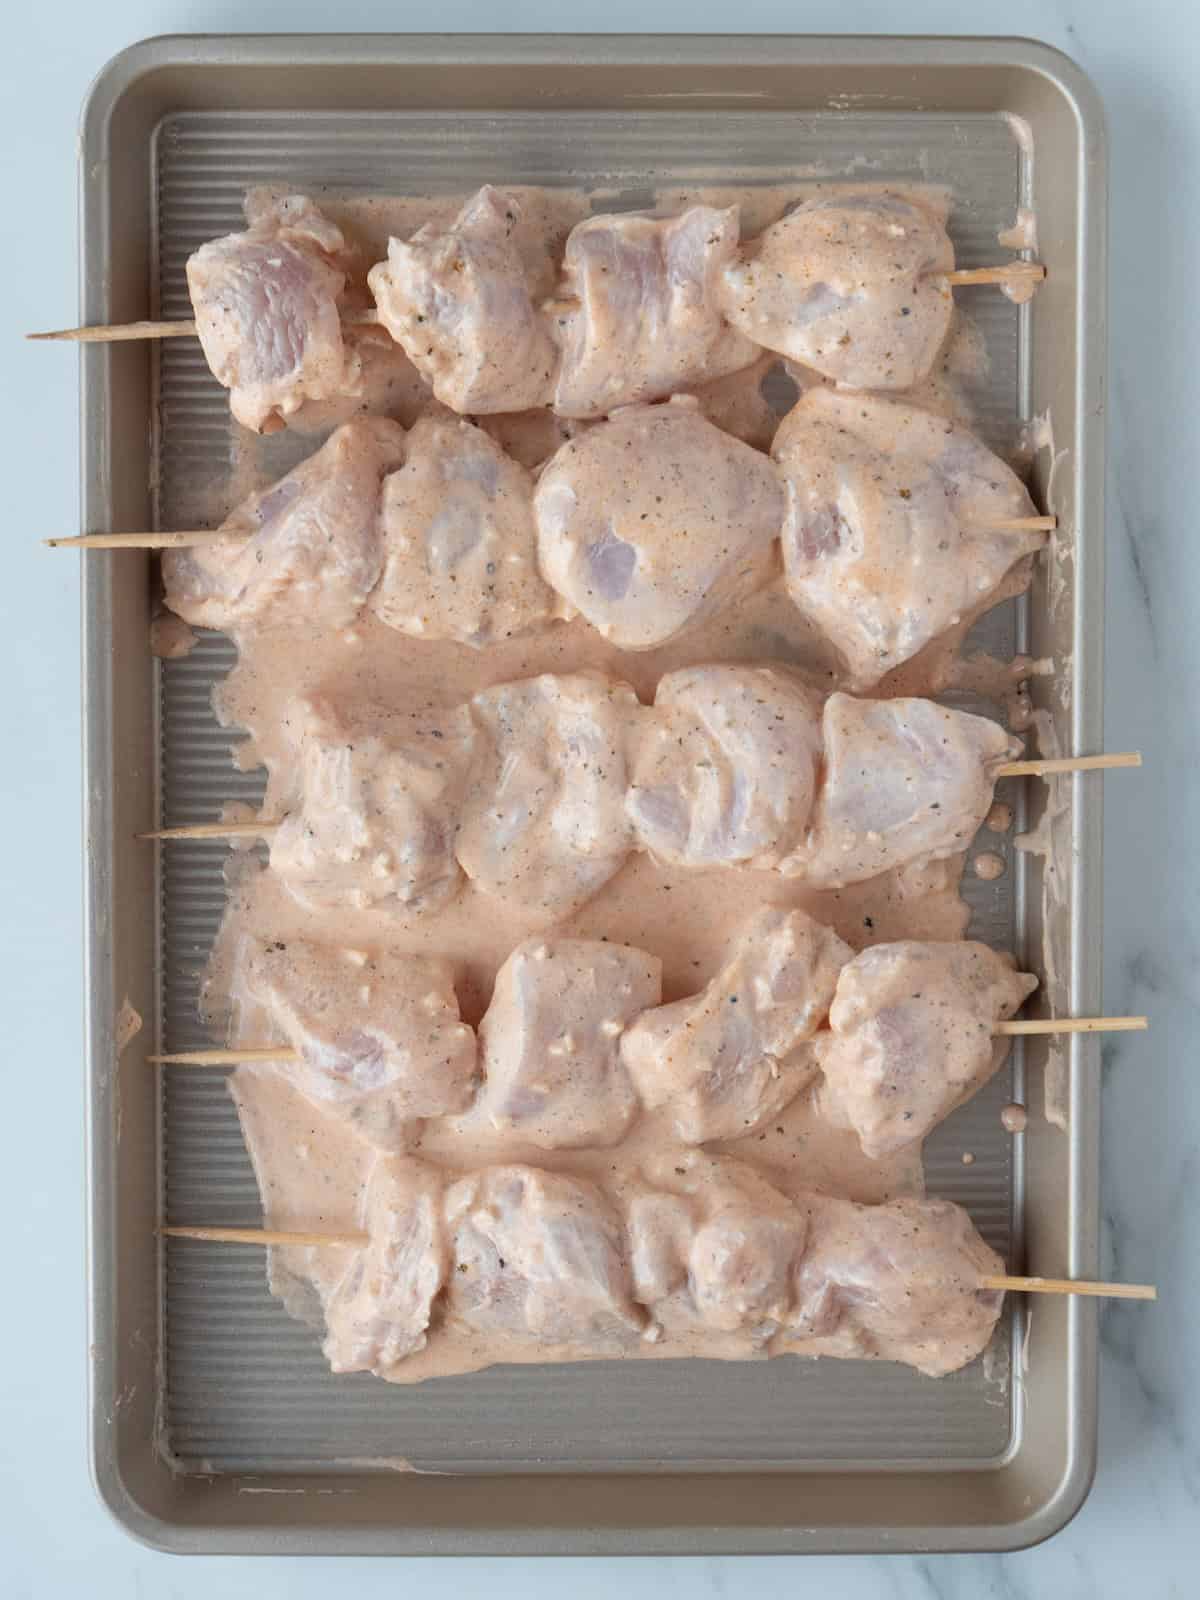 A baking sheet with chicken skewers, made with wooden skewers that have marinated chunks of chicken threaded through them, ready to be cooked.